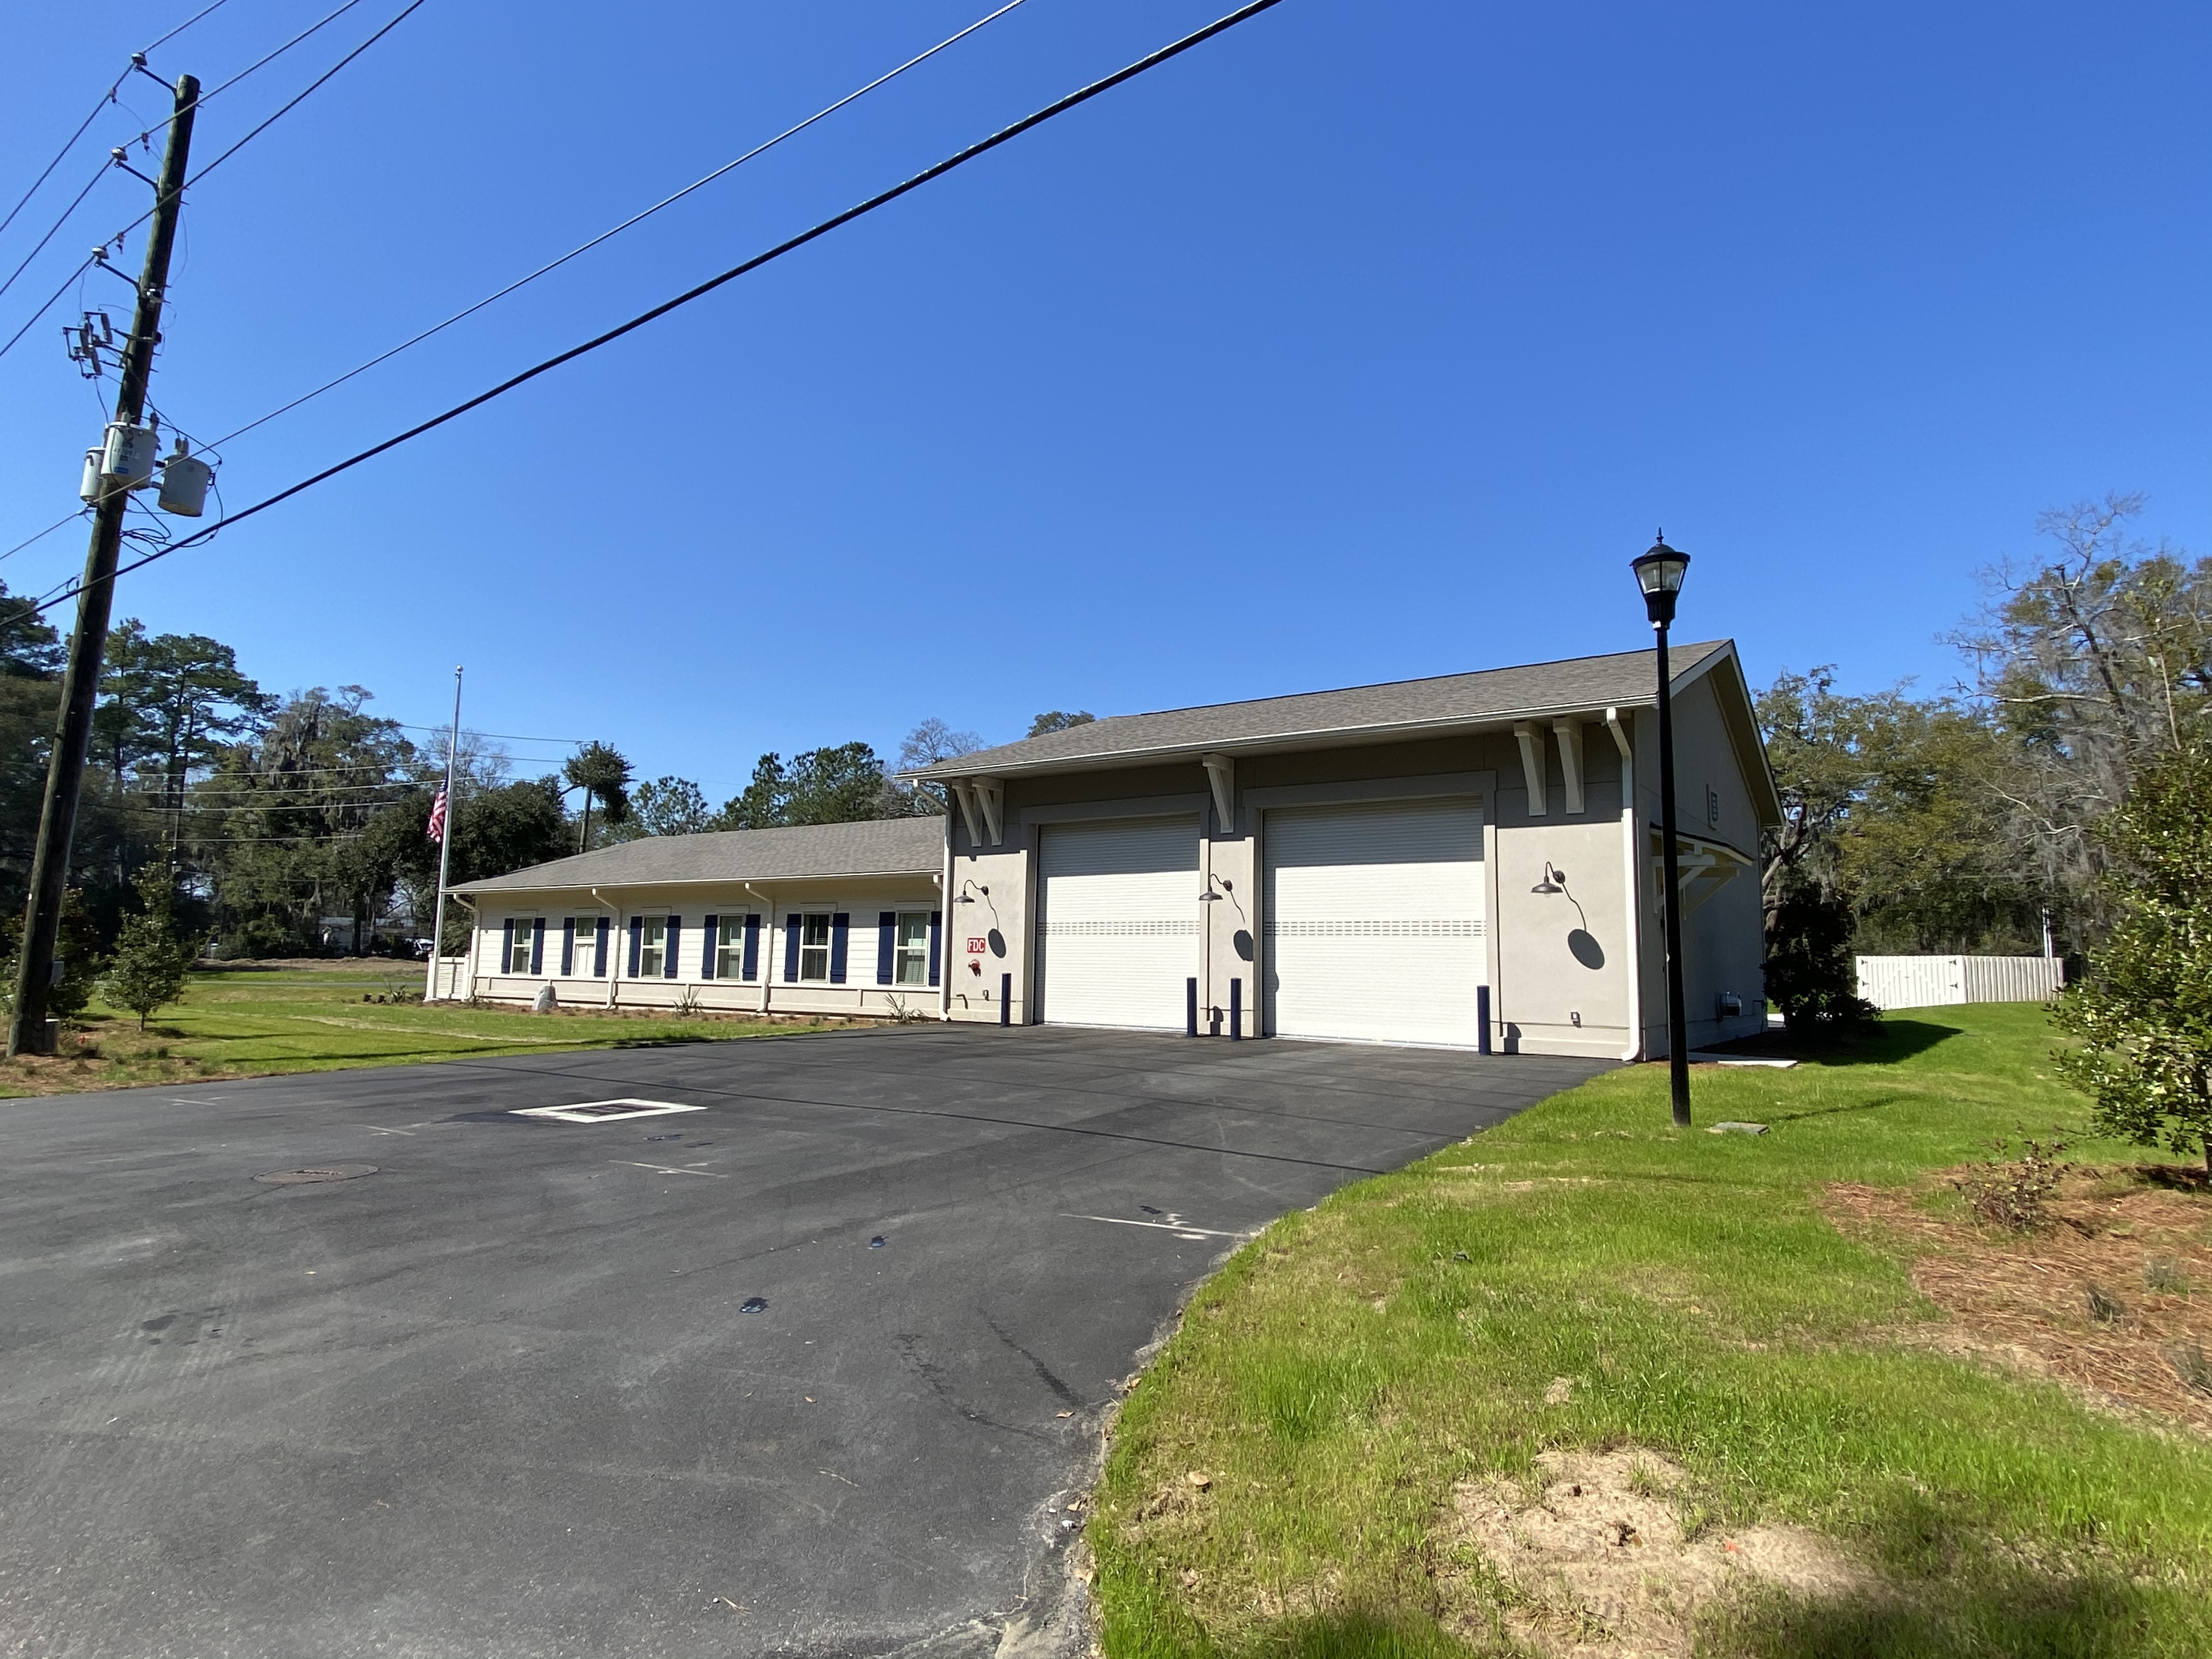 Beaufort County Emergency Medical Services Will Host a Virtual and In-Person Grand Opening With Ribbon Cutting of New Shanklin Road EMS Station